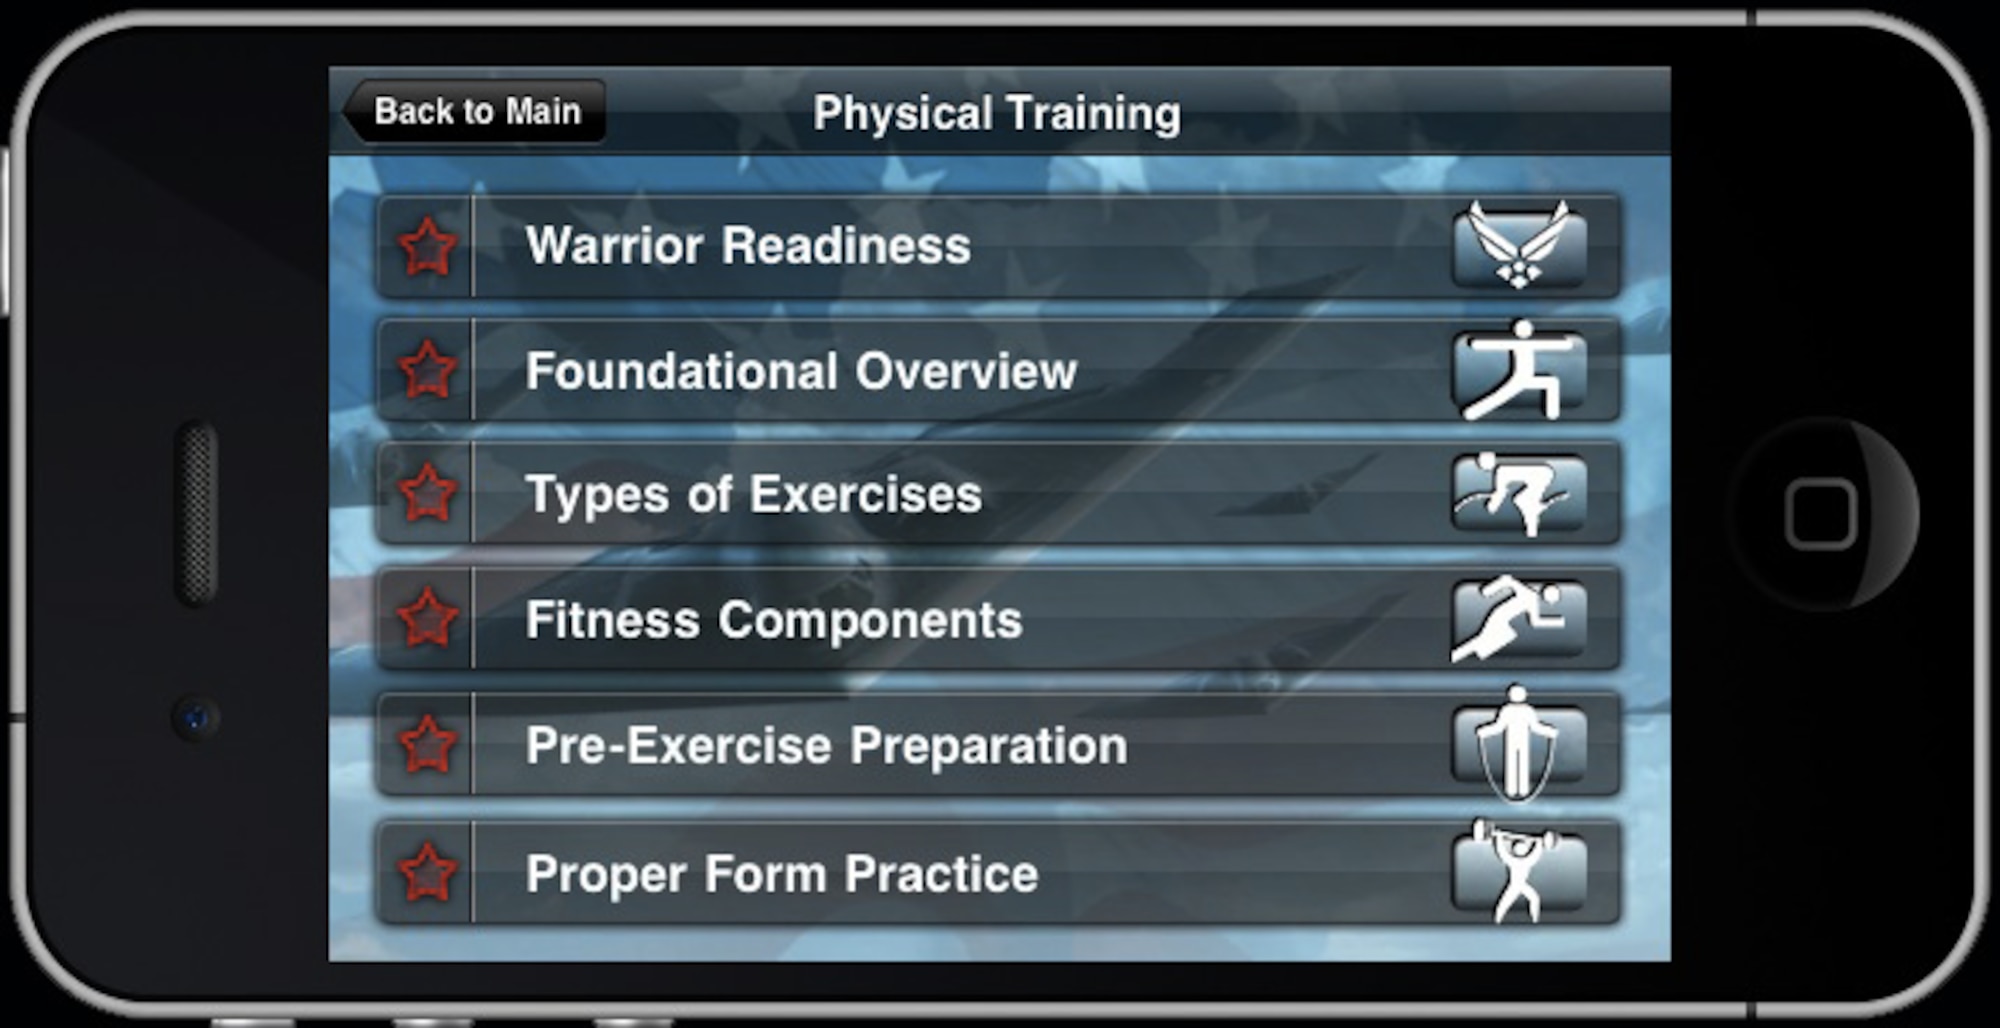 Air Force Airmen Fundamentals Physical Training ipod interface image of mobile phone app.The physical training segment of the app includes menus for warm-up and cool-down plus pre-exercise preparation. 